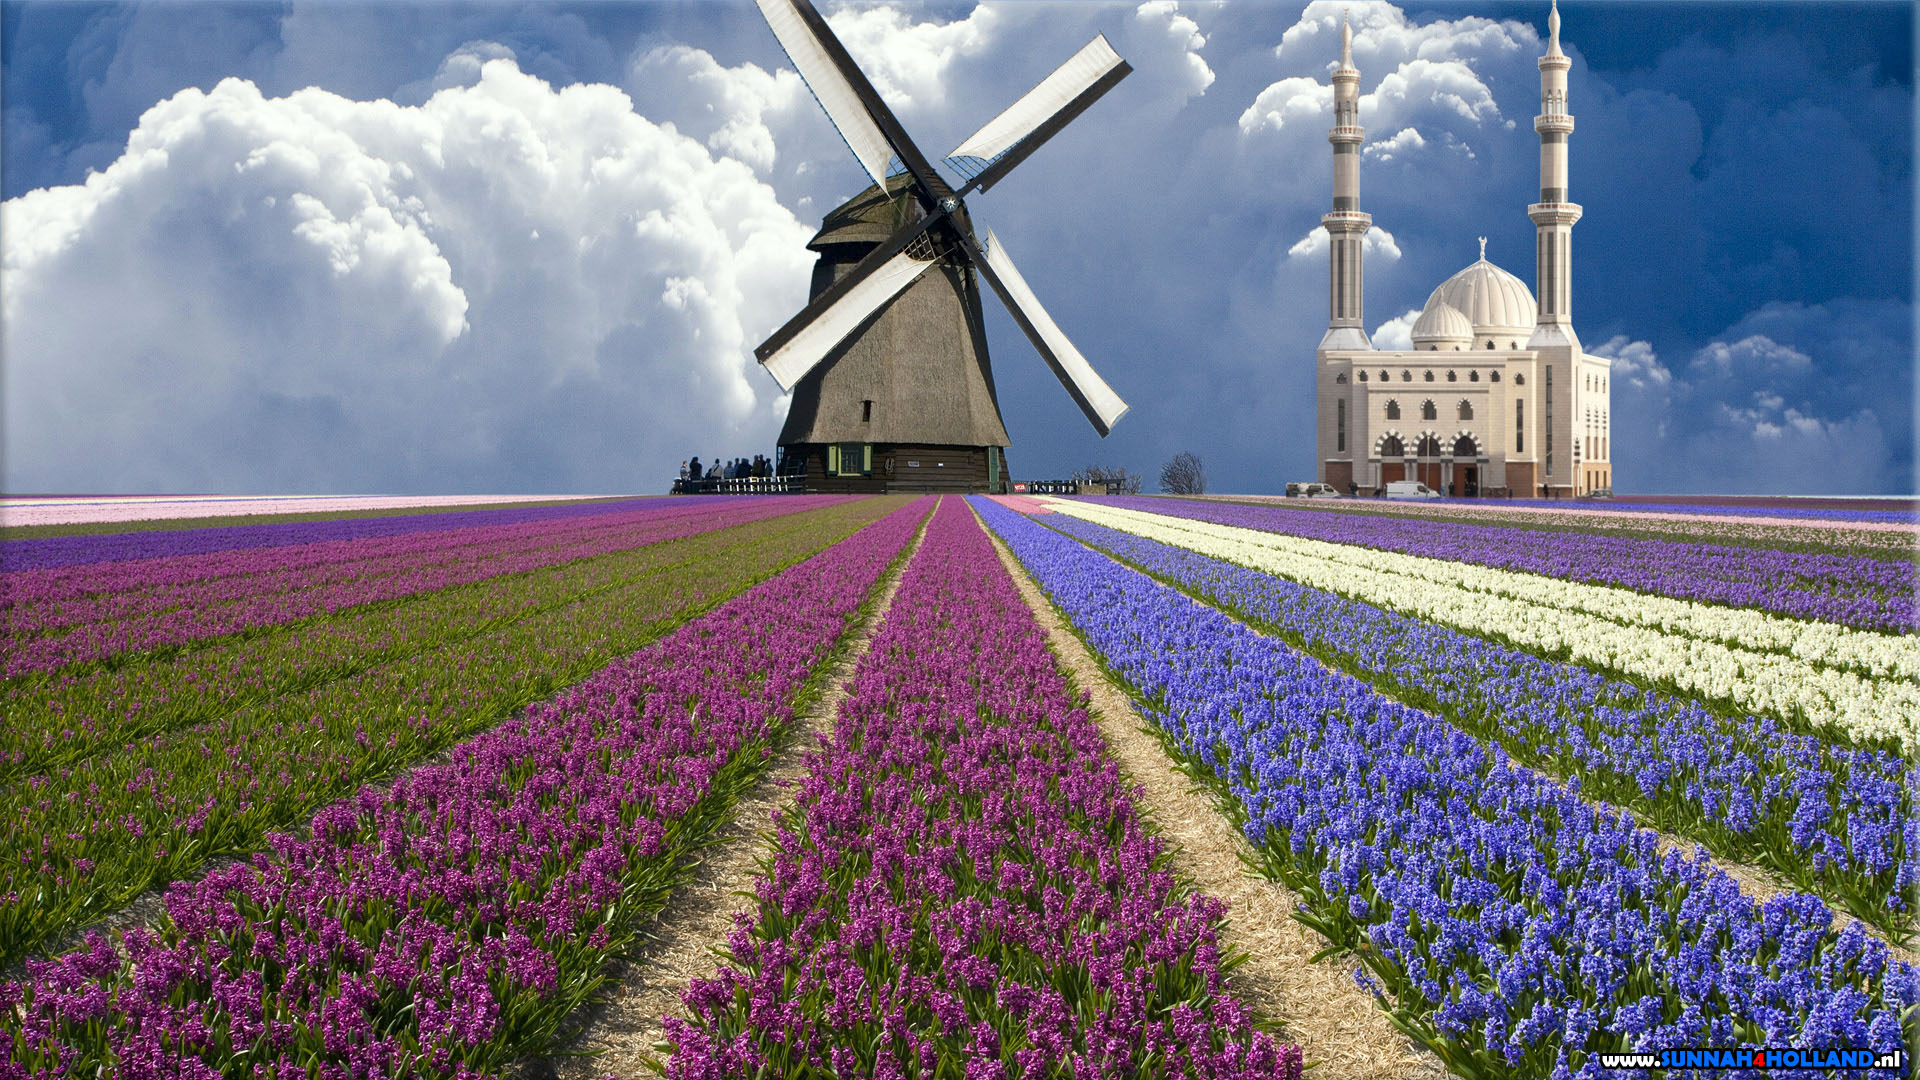 Dutch Mosque Essalam Rotterdam With Tulips And A Windmill Molen